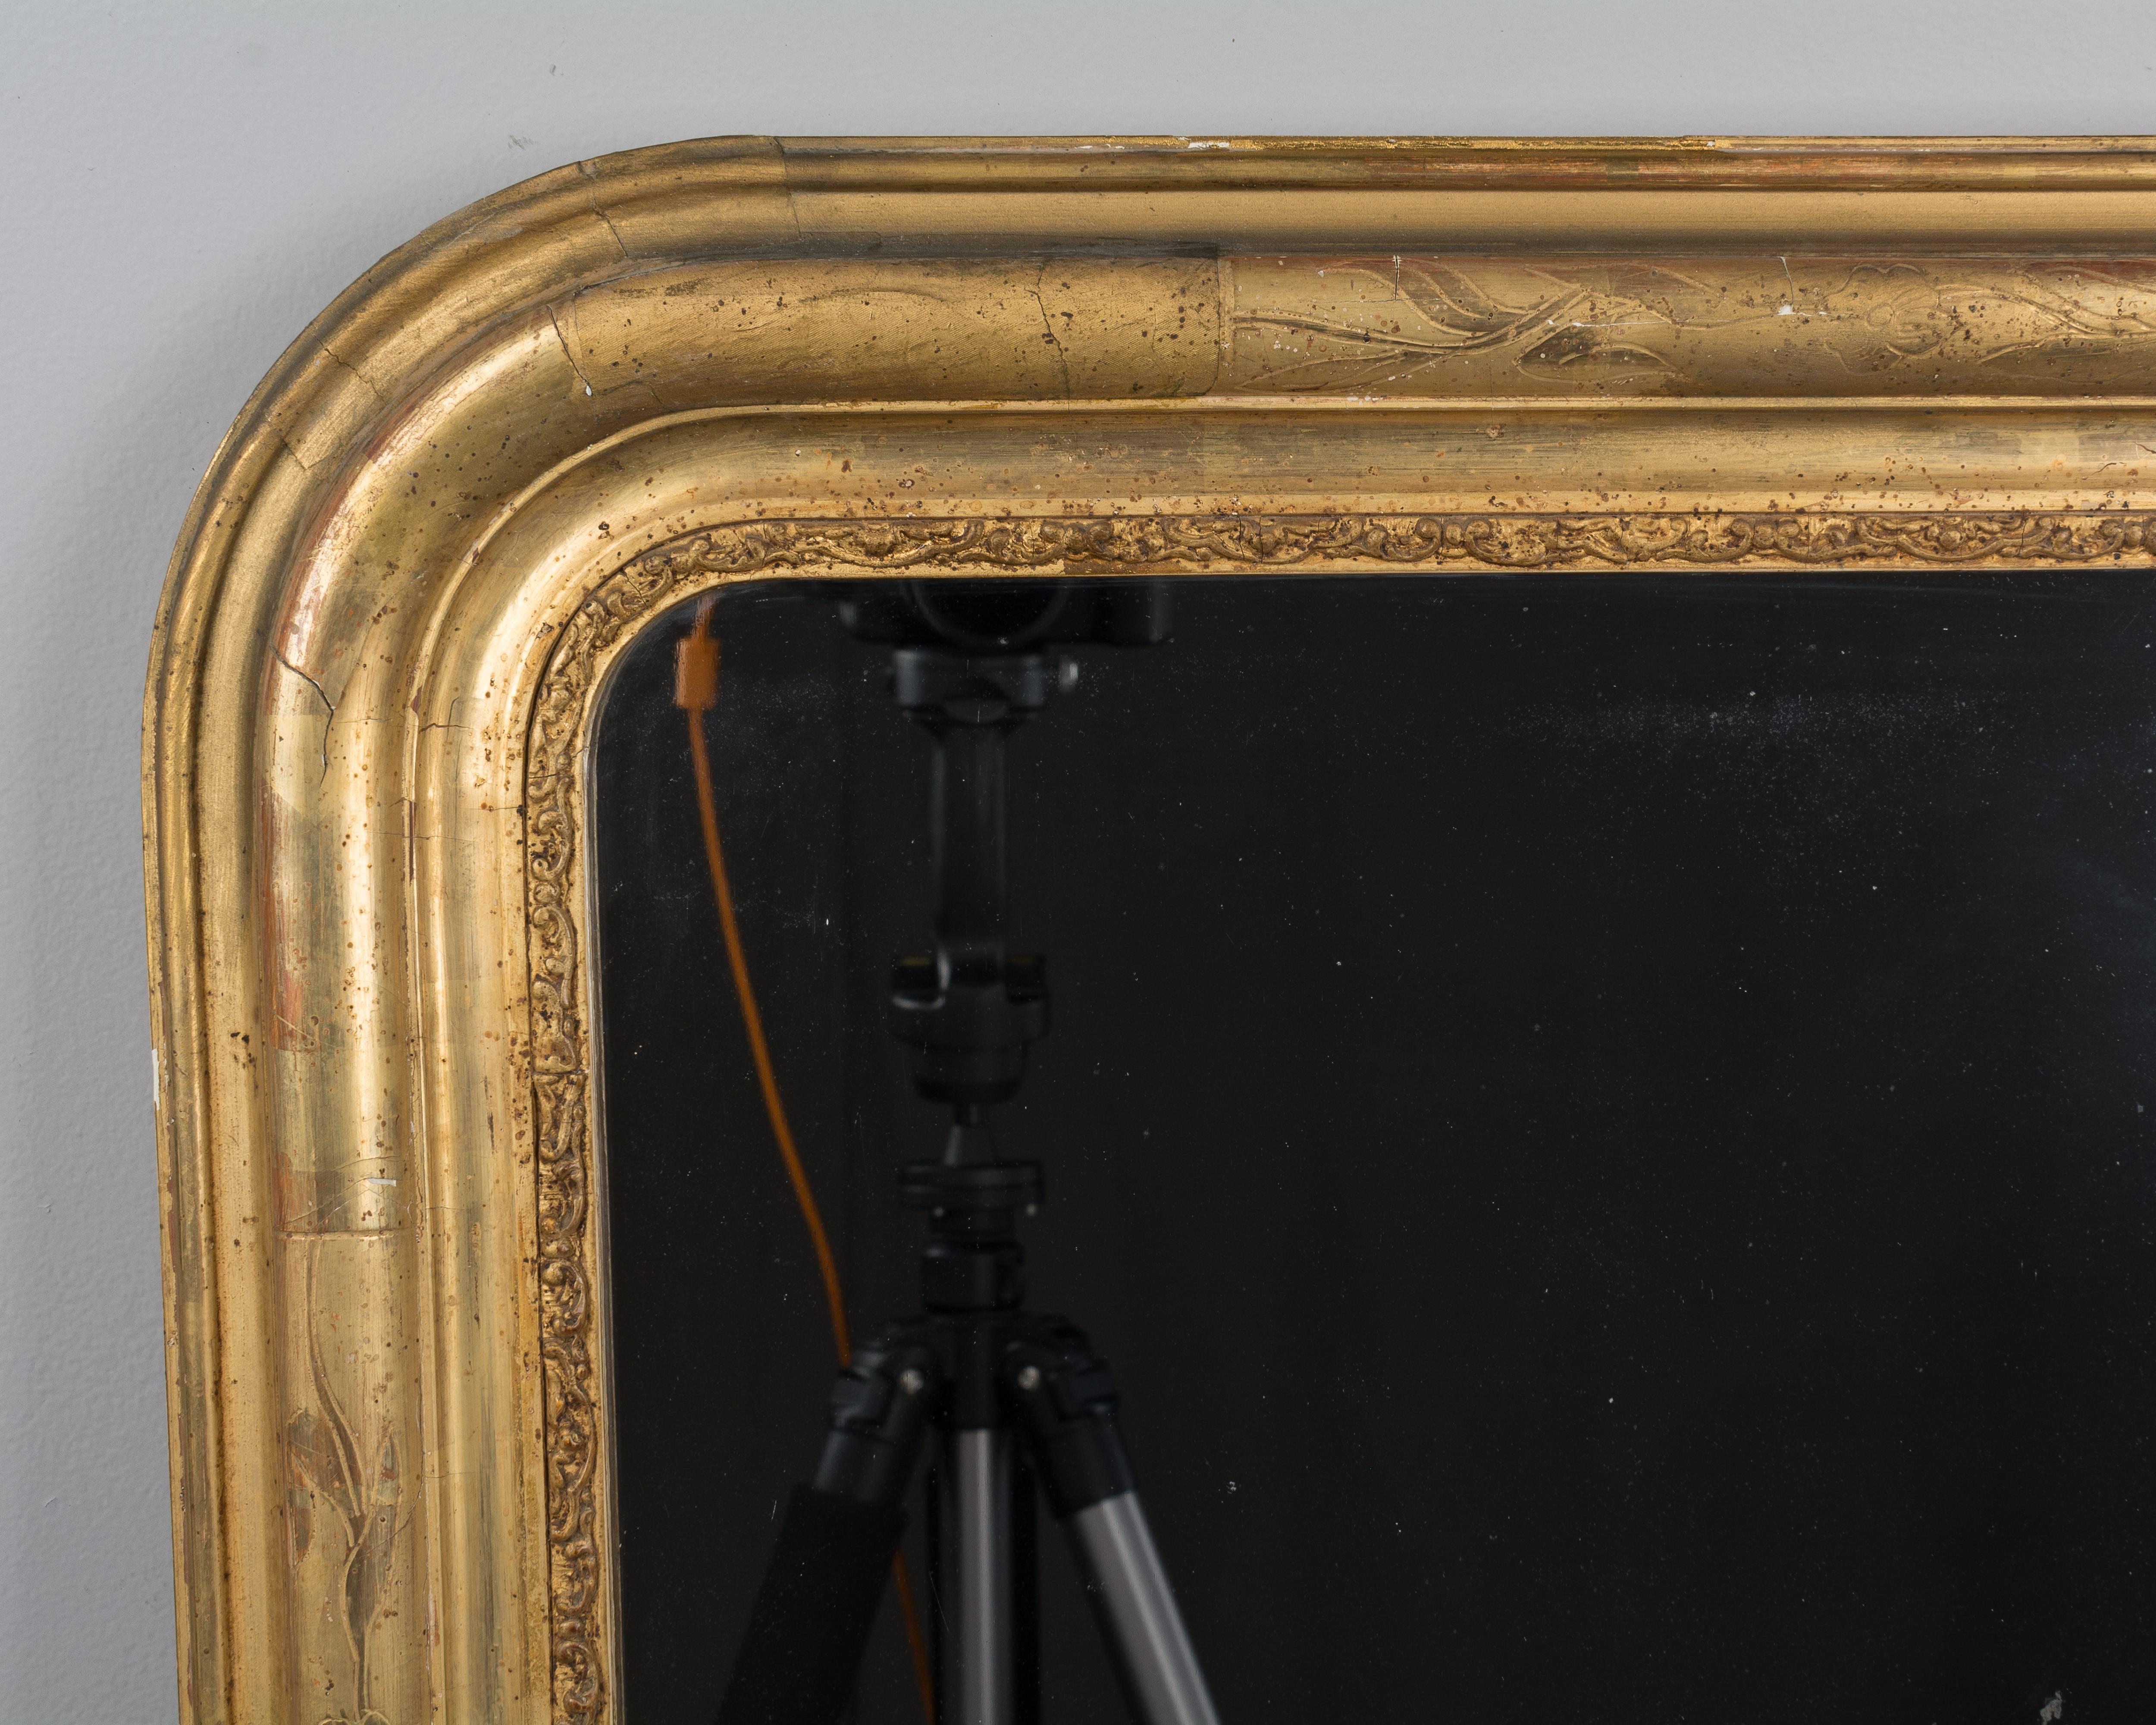 A 19th century Louis Philippe gilded mirror with curved top corners, bright gilt with incised decoration. Original mirror with old silvering. Dimensions are 26.25